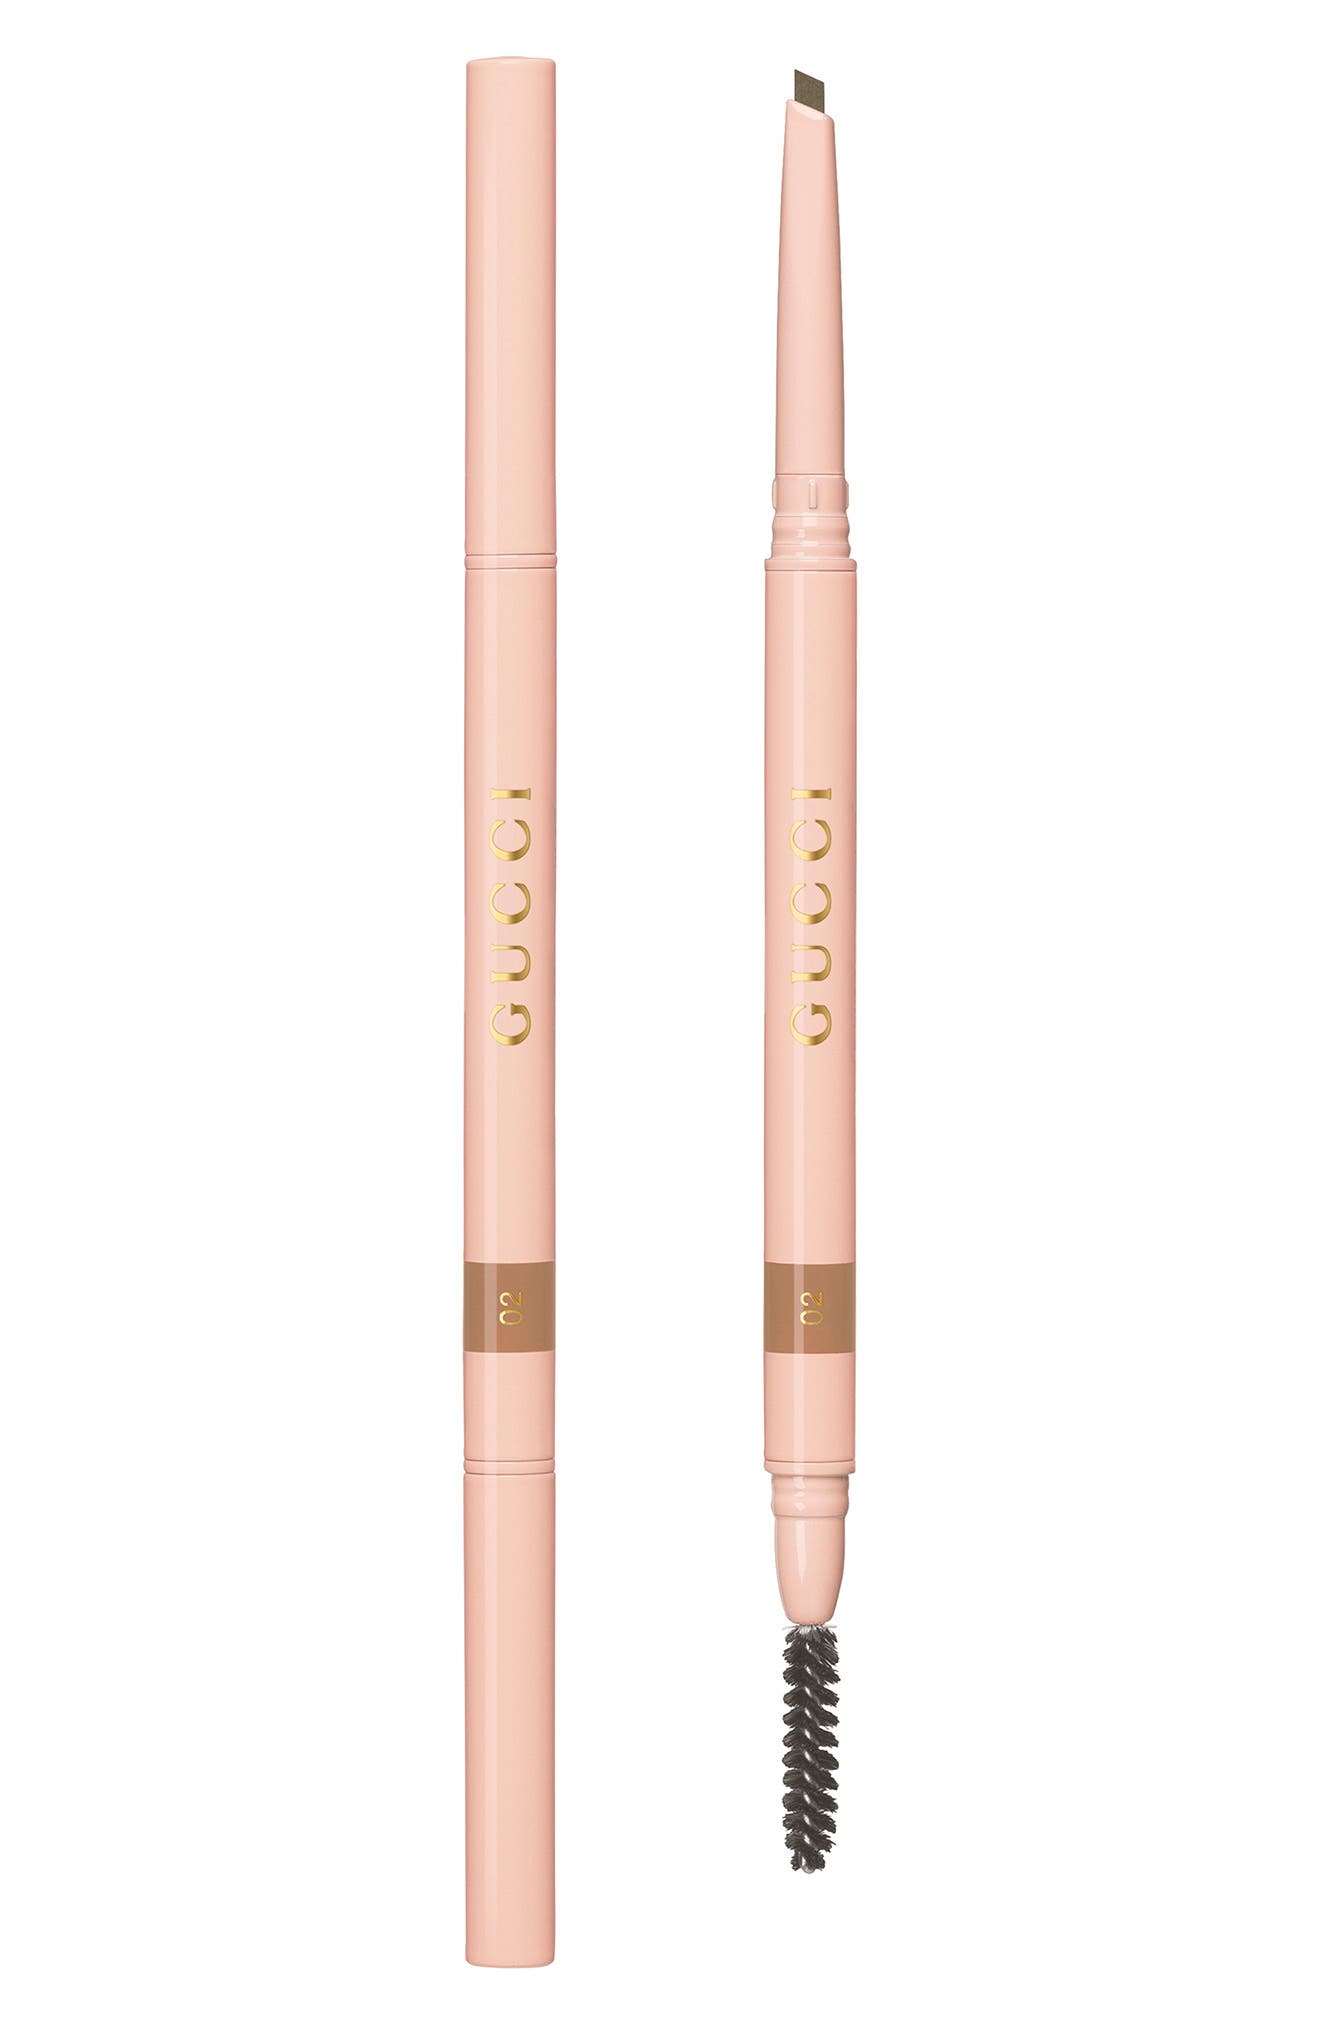 Gucci Stylo A Sourcils Waterpoof Eyebrow Pencil in 02 Blond at Nordstrom